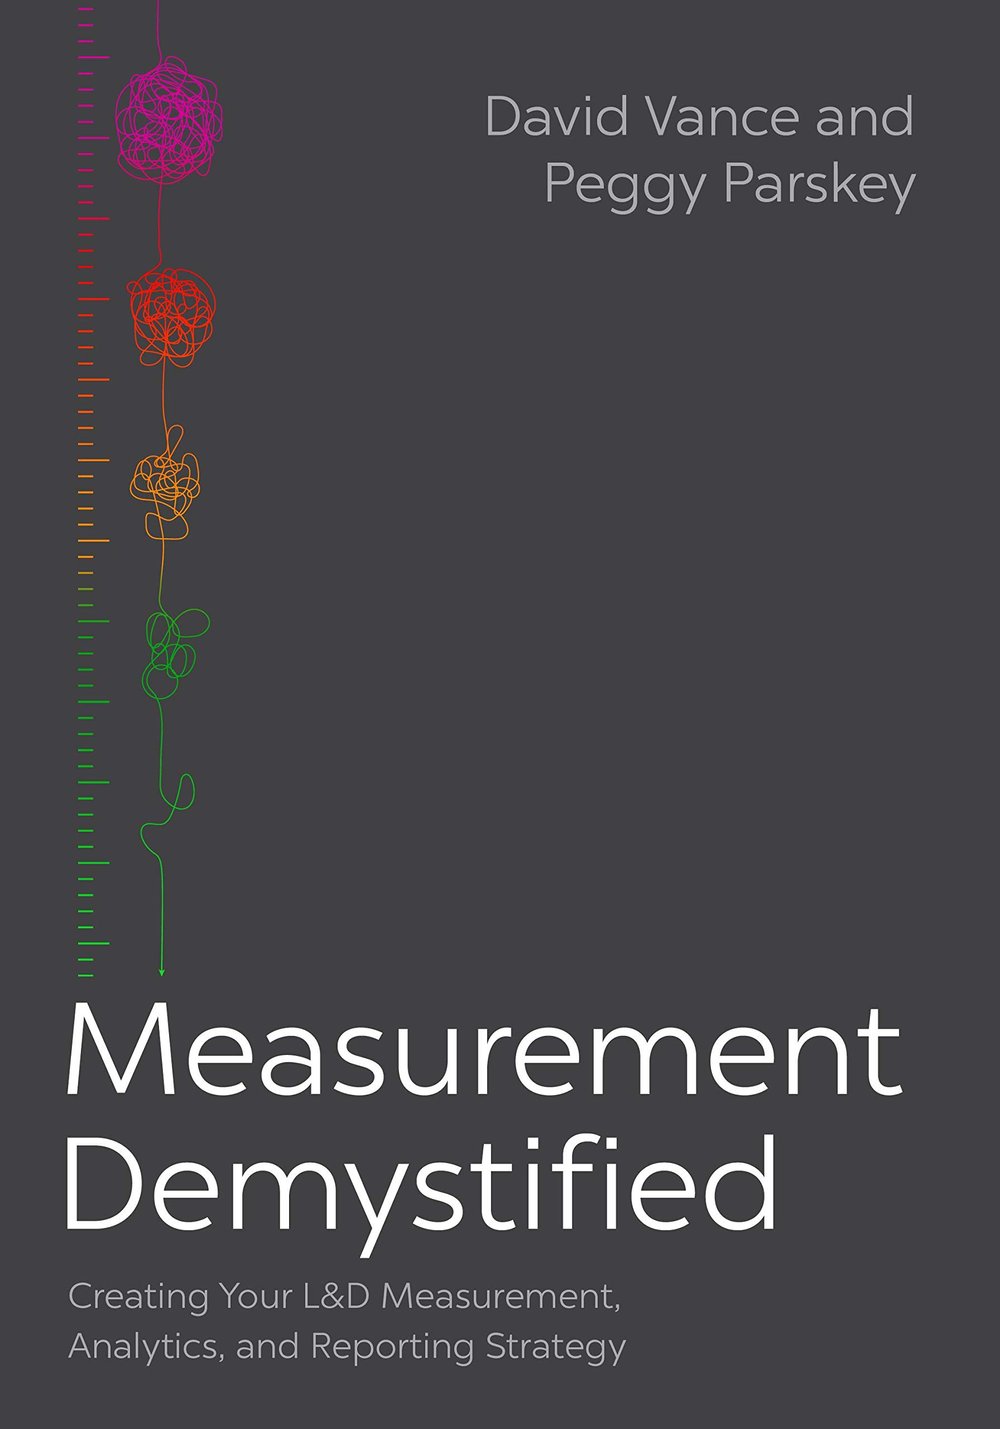 Measurement Demystified by Peggy Parskey and David Vance